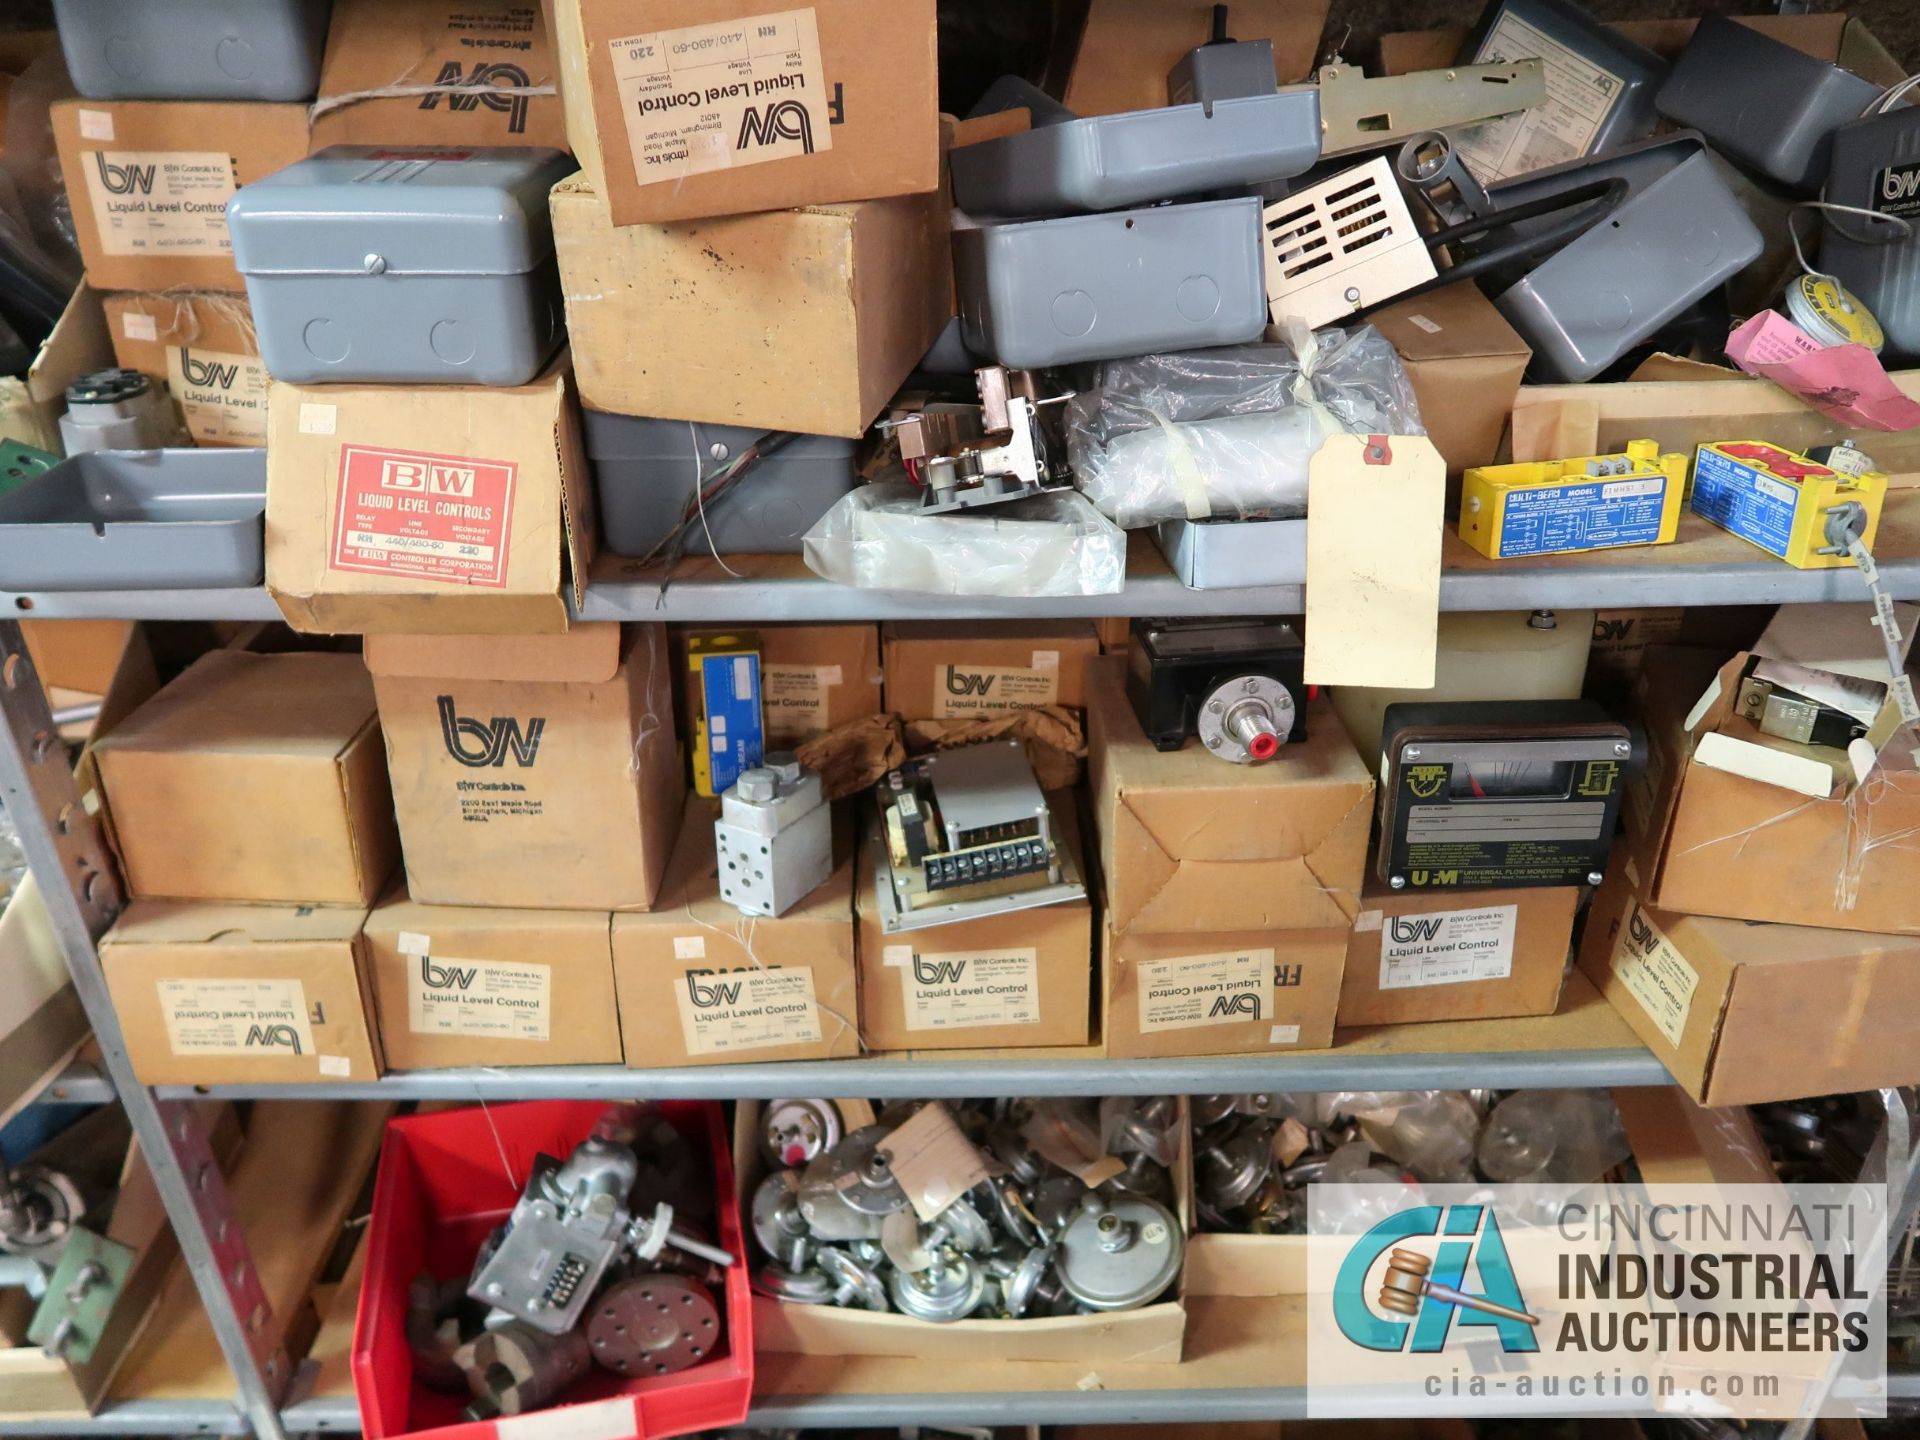 CONTENTS OF (16) SHELVES INCLUDING MISCELLANEOUS VALVES, THERMOSTATS, ANALYZERS, ELECTRICAL, CONTROL - Image 22 of 47